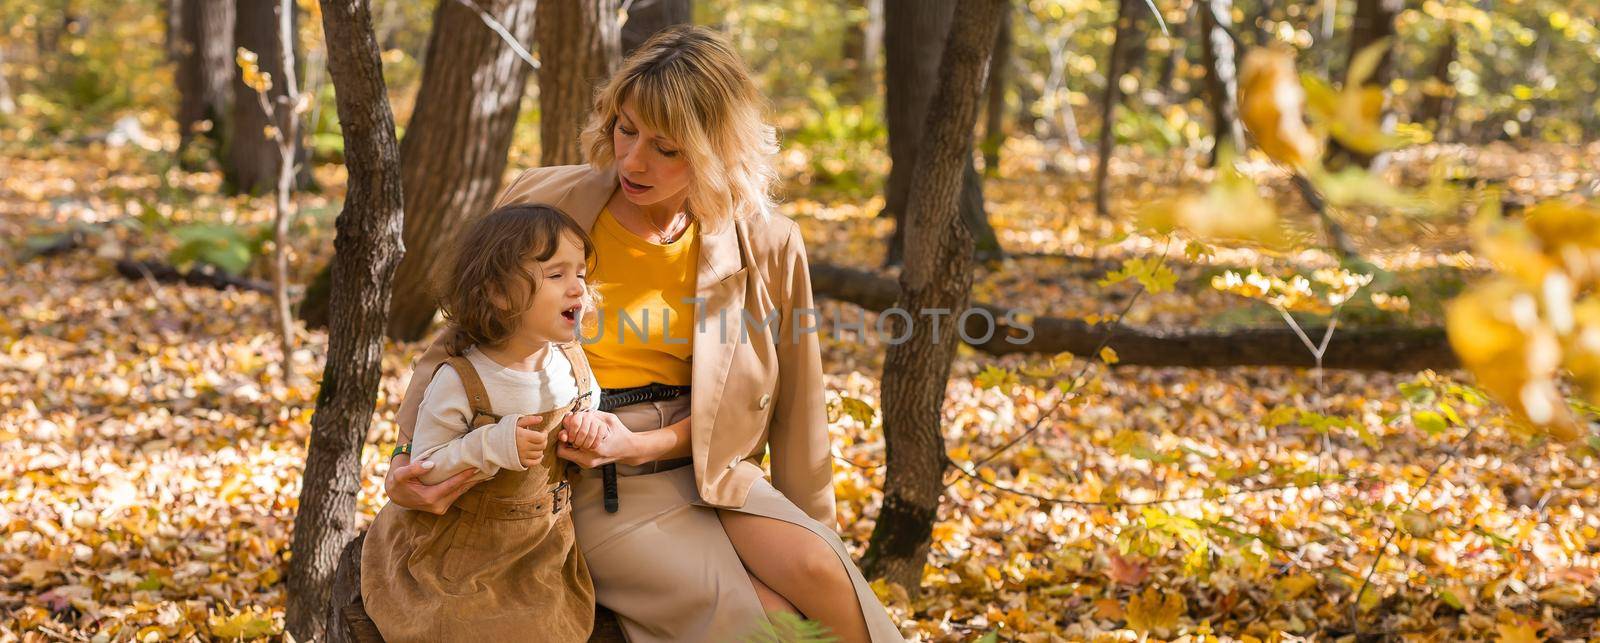 Banner mother comforting her crying little girl in autumn nature copy space. Emotions and family concept. by Satura86